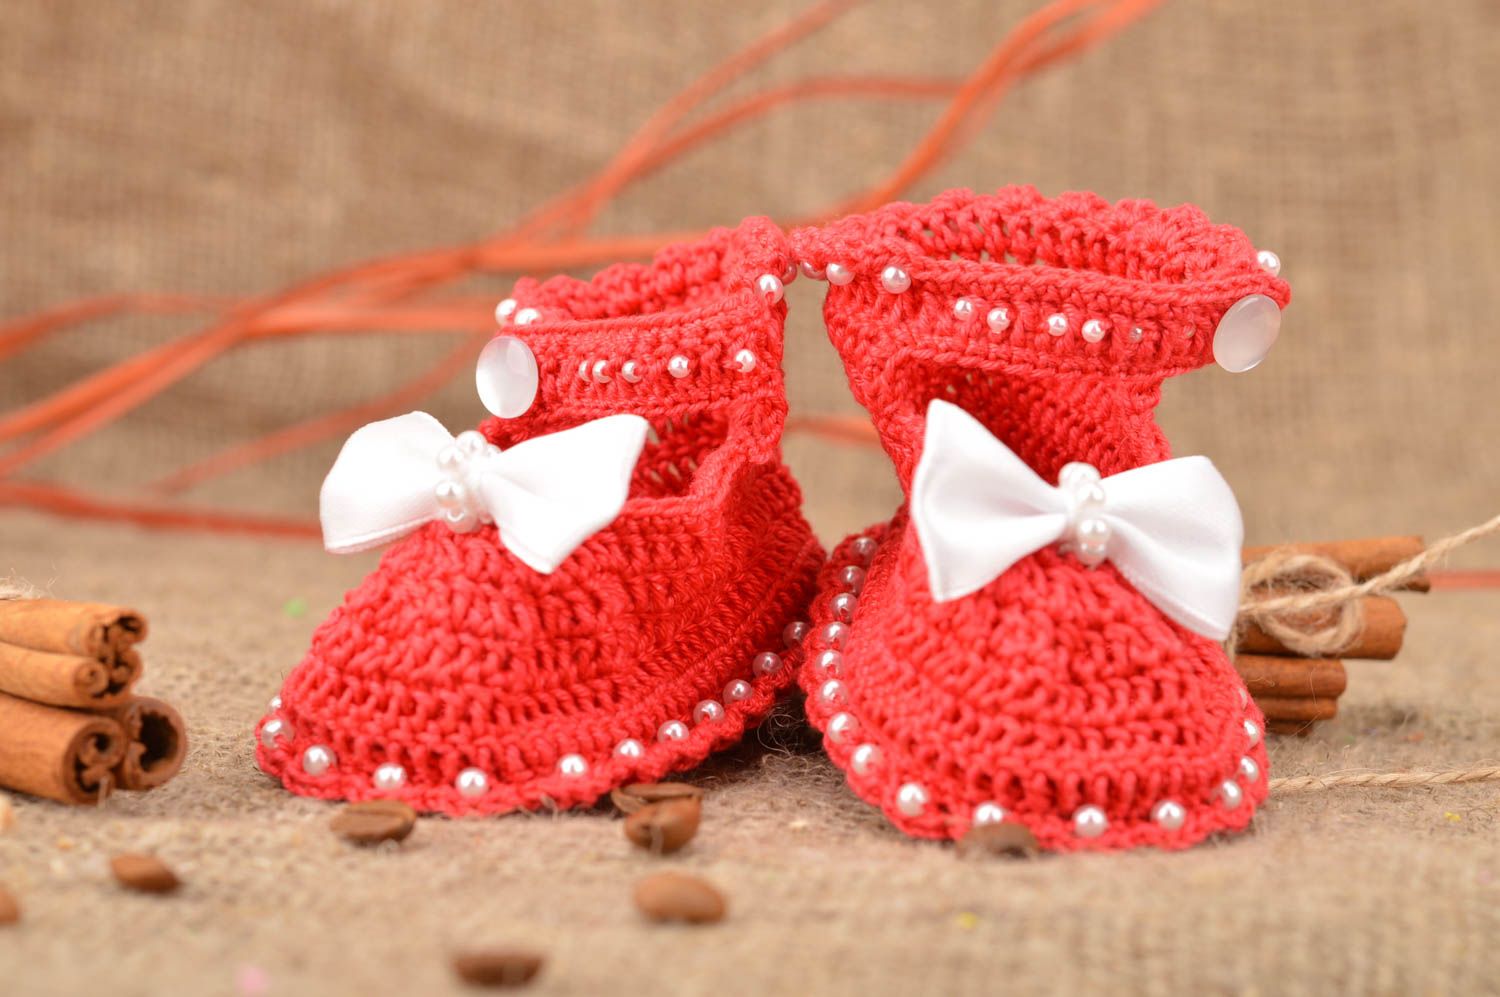 Handmade designer cotton crocheted bright red baby shoes with white bows photo 1